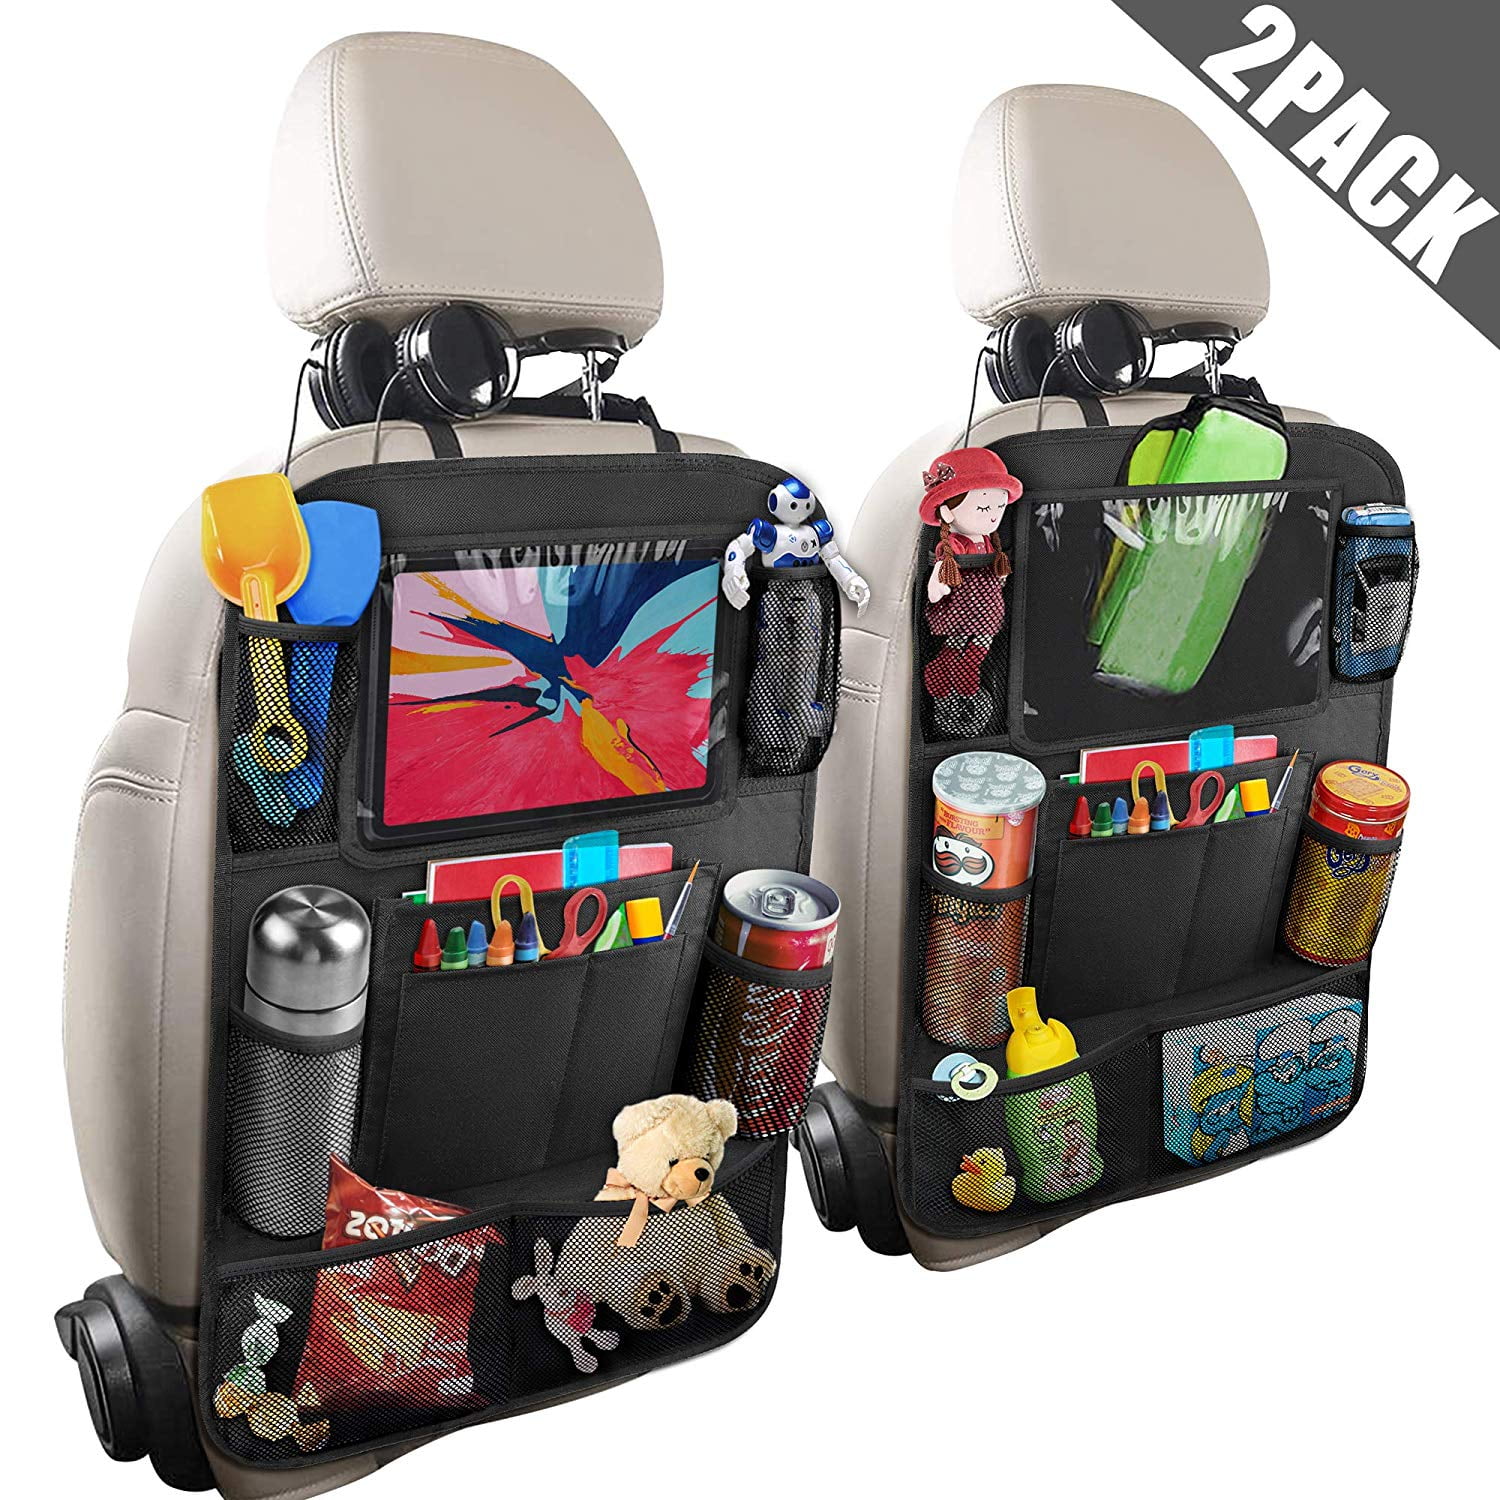 Car Backseat Organizer 2 Pack for Kids with Touch Screen Tablet Holder Waterproof Kick Mats Back Seat Protectors fit Car/Truck/SUVs Storage Pockets for Travel/Business,Car Accessories for Stuff 